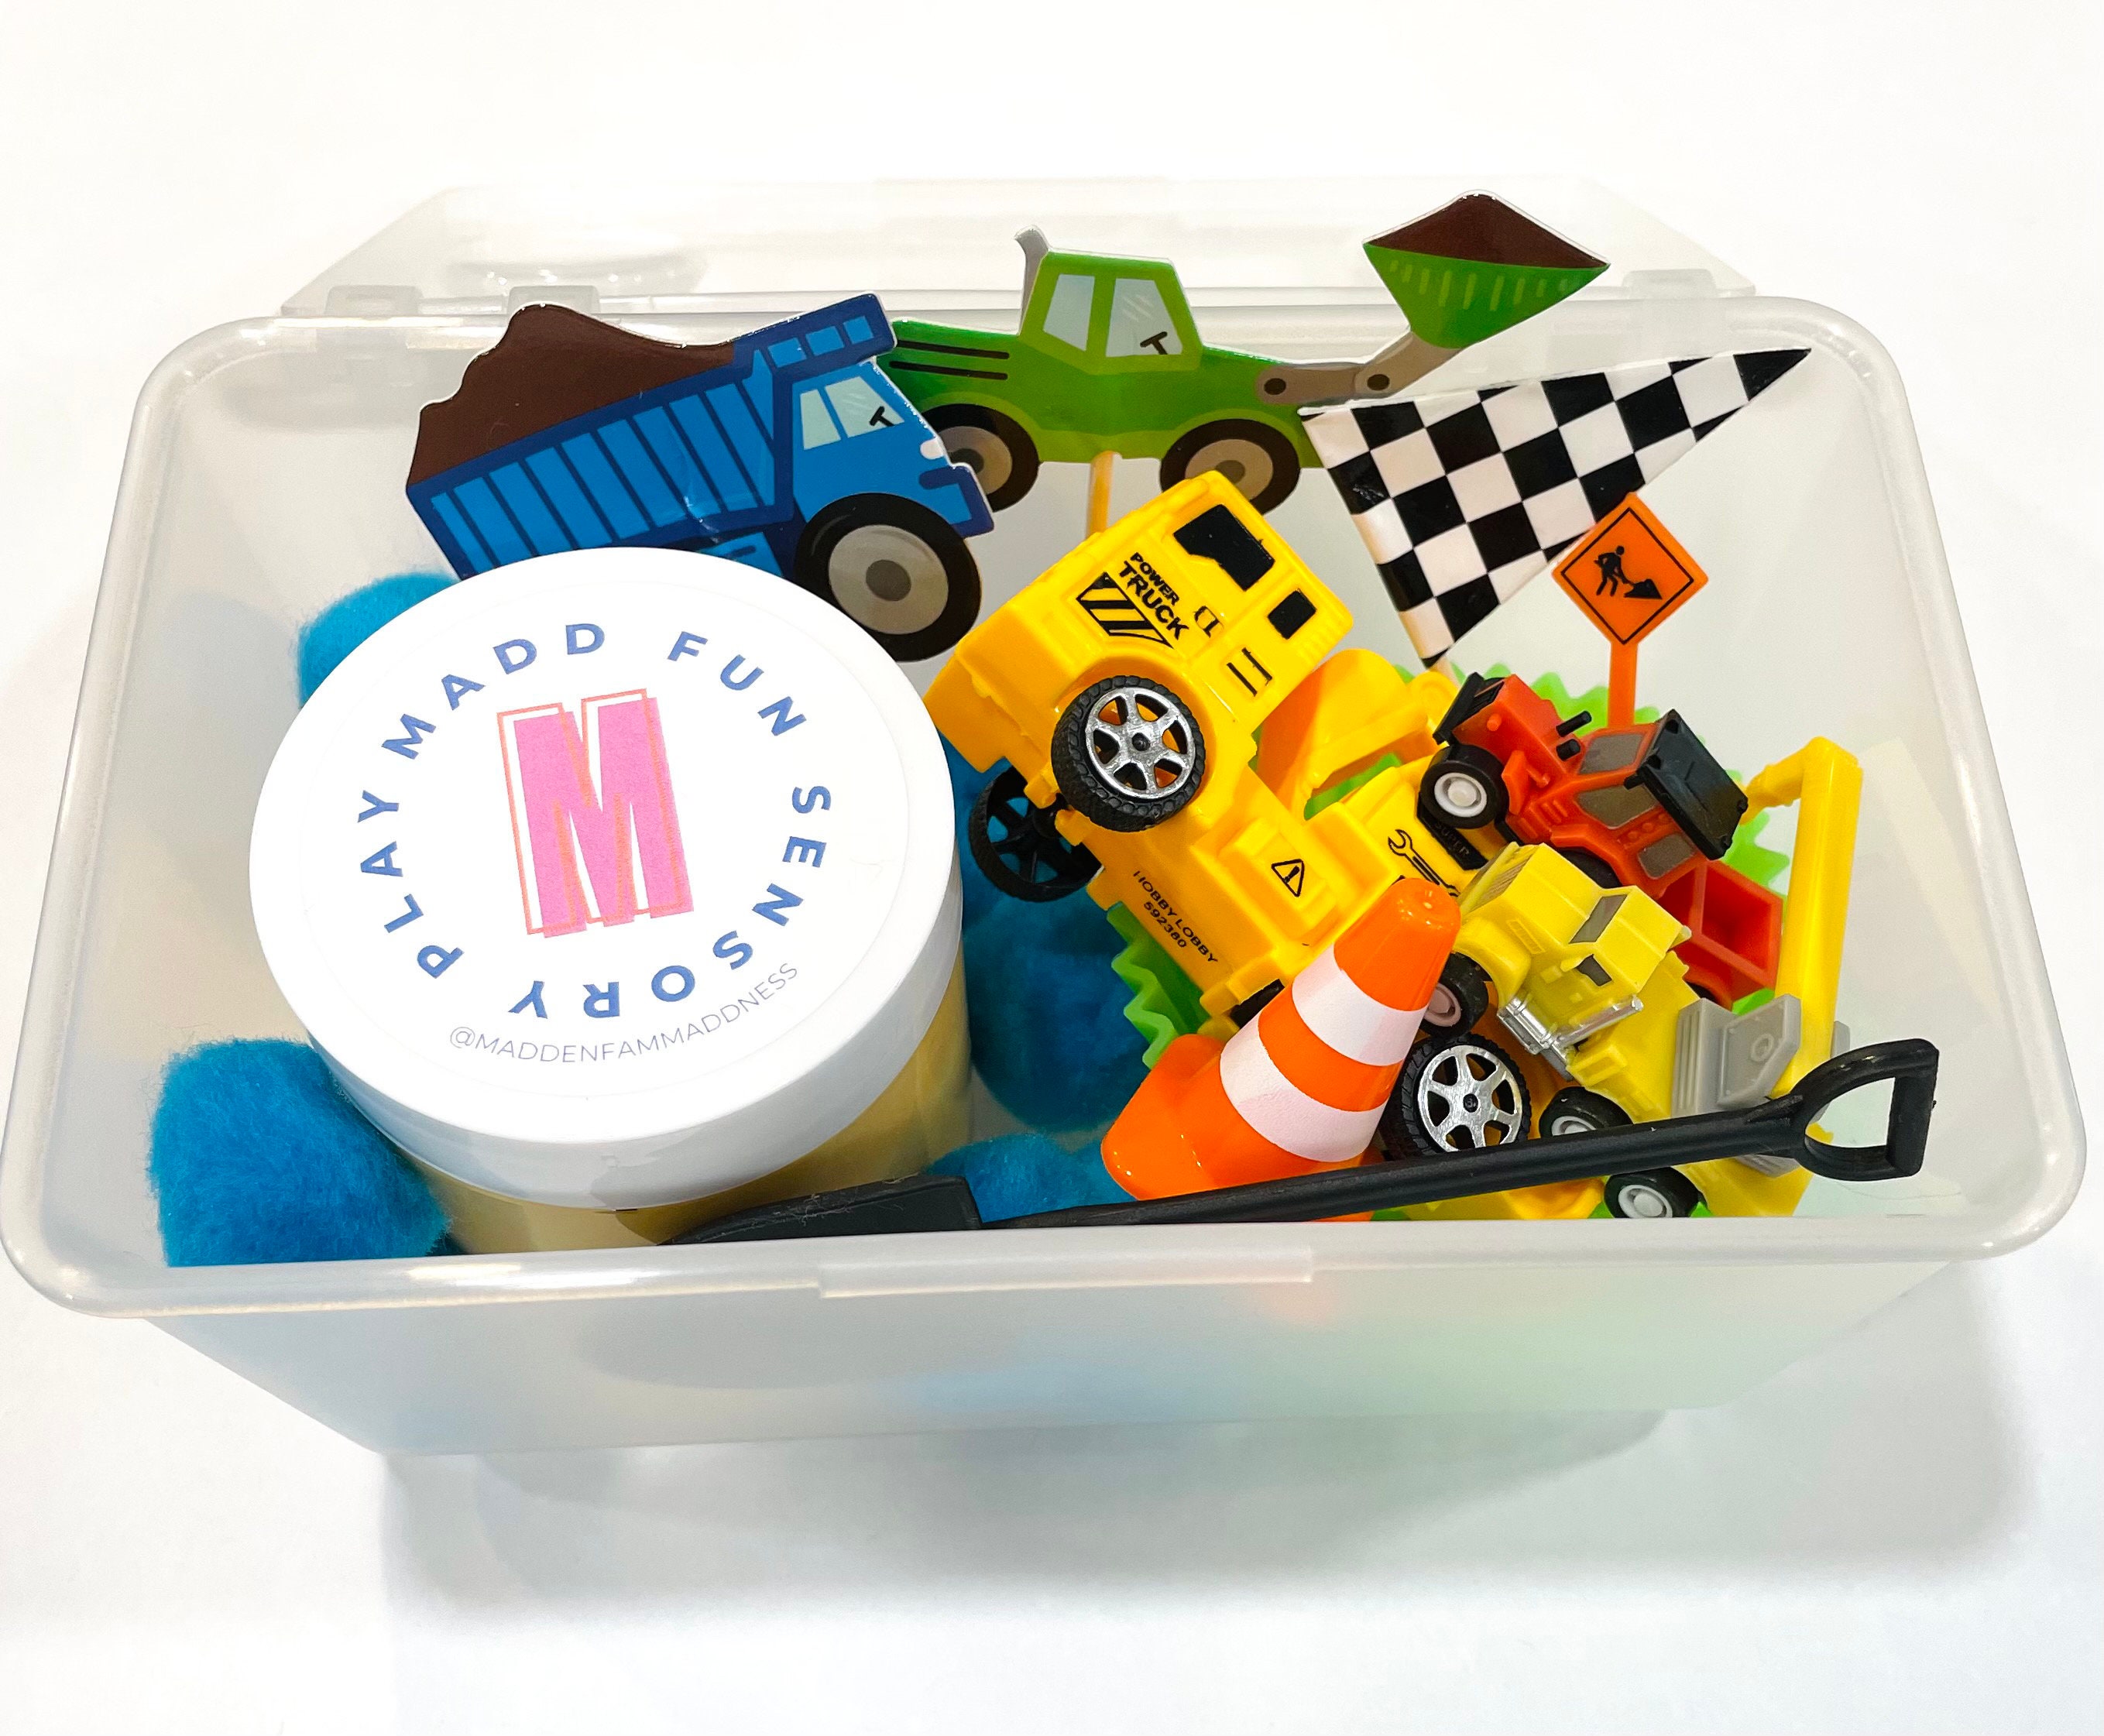 Construction Play Dough Party Favors, Truck Play Doh Sensory Jars, Kids  Birthday Gift, Class Goodie Bags, Homemade Play Dough 